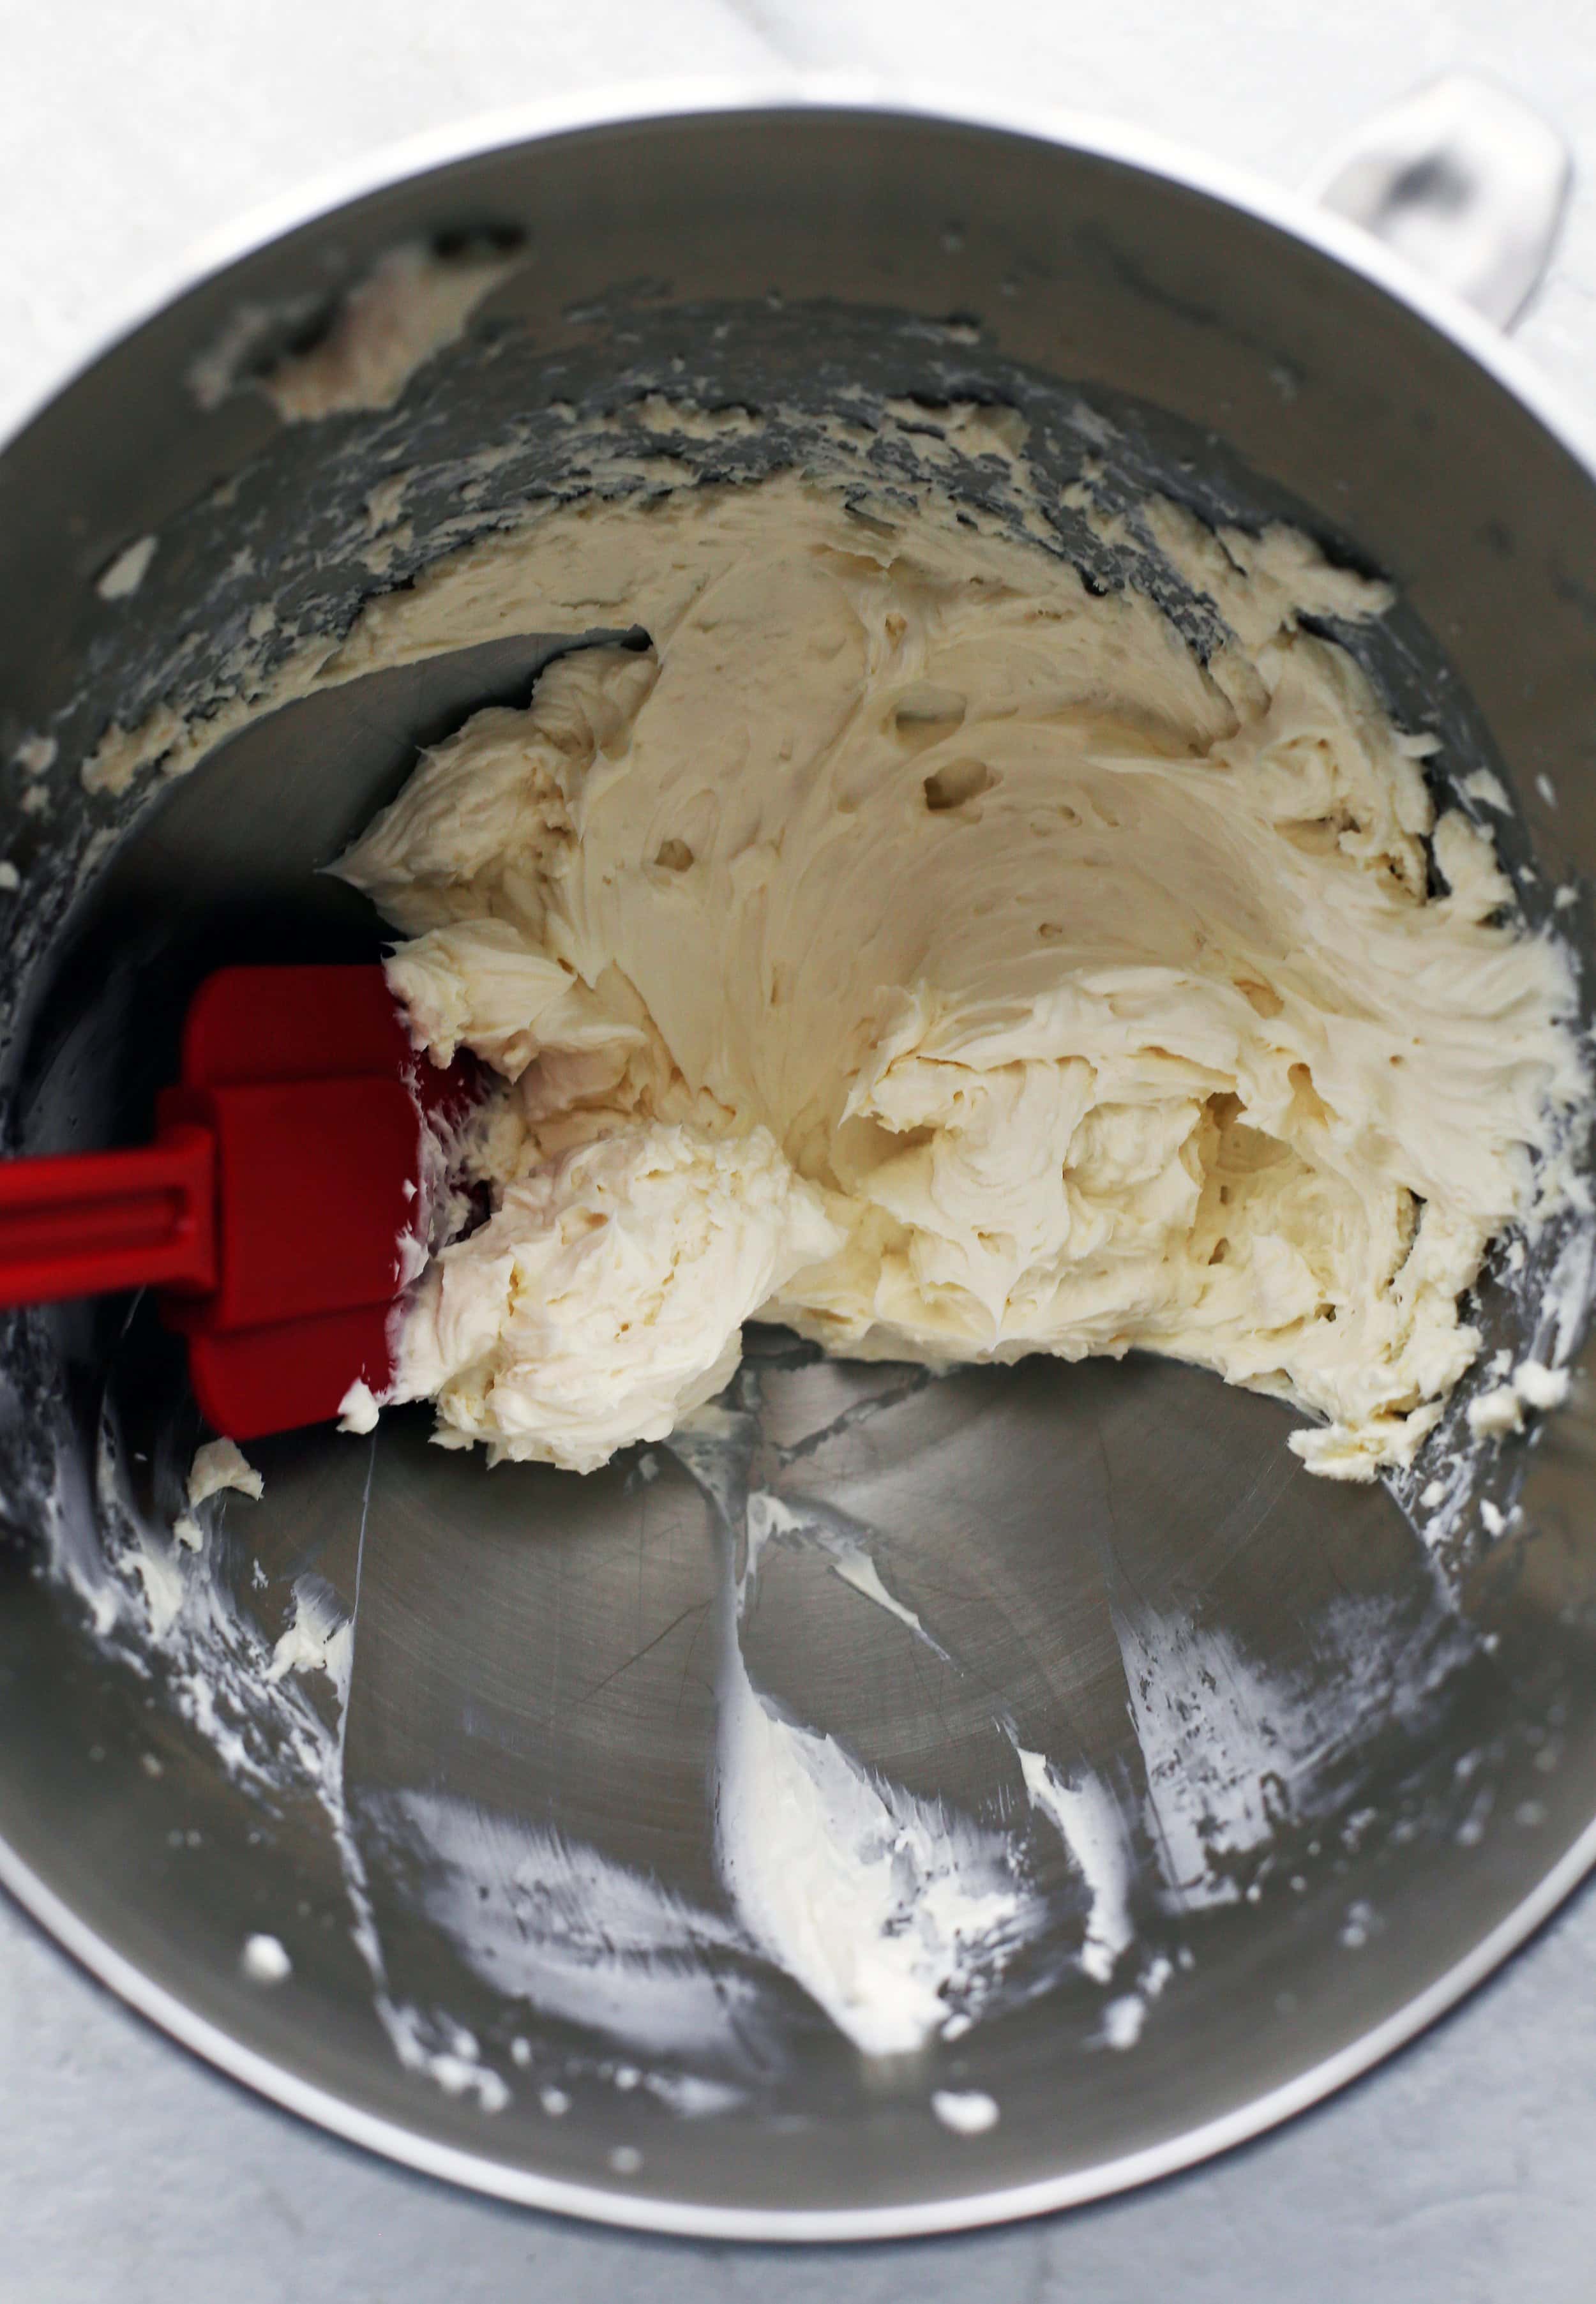 Cream cheese, vanilla extract, and sugar whisked together in a metal bowl.